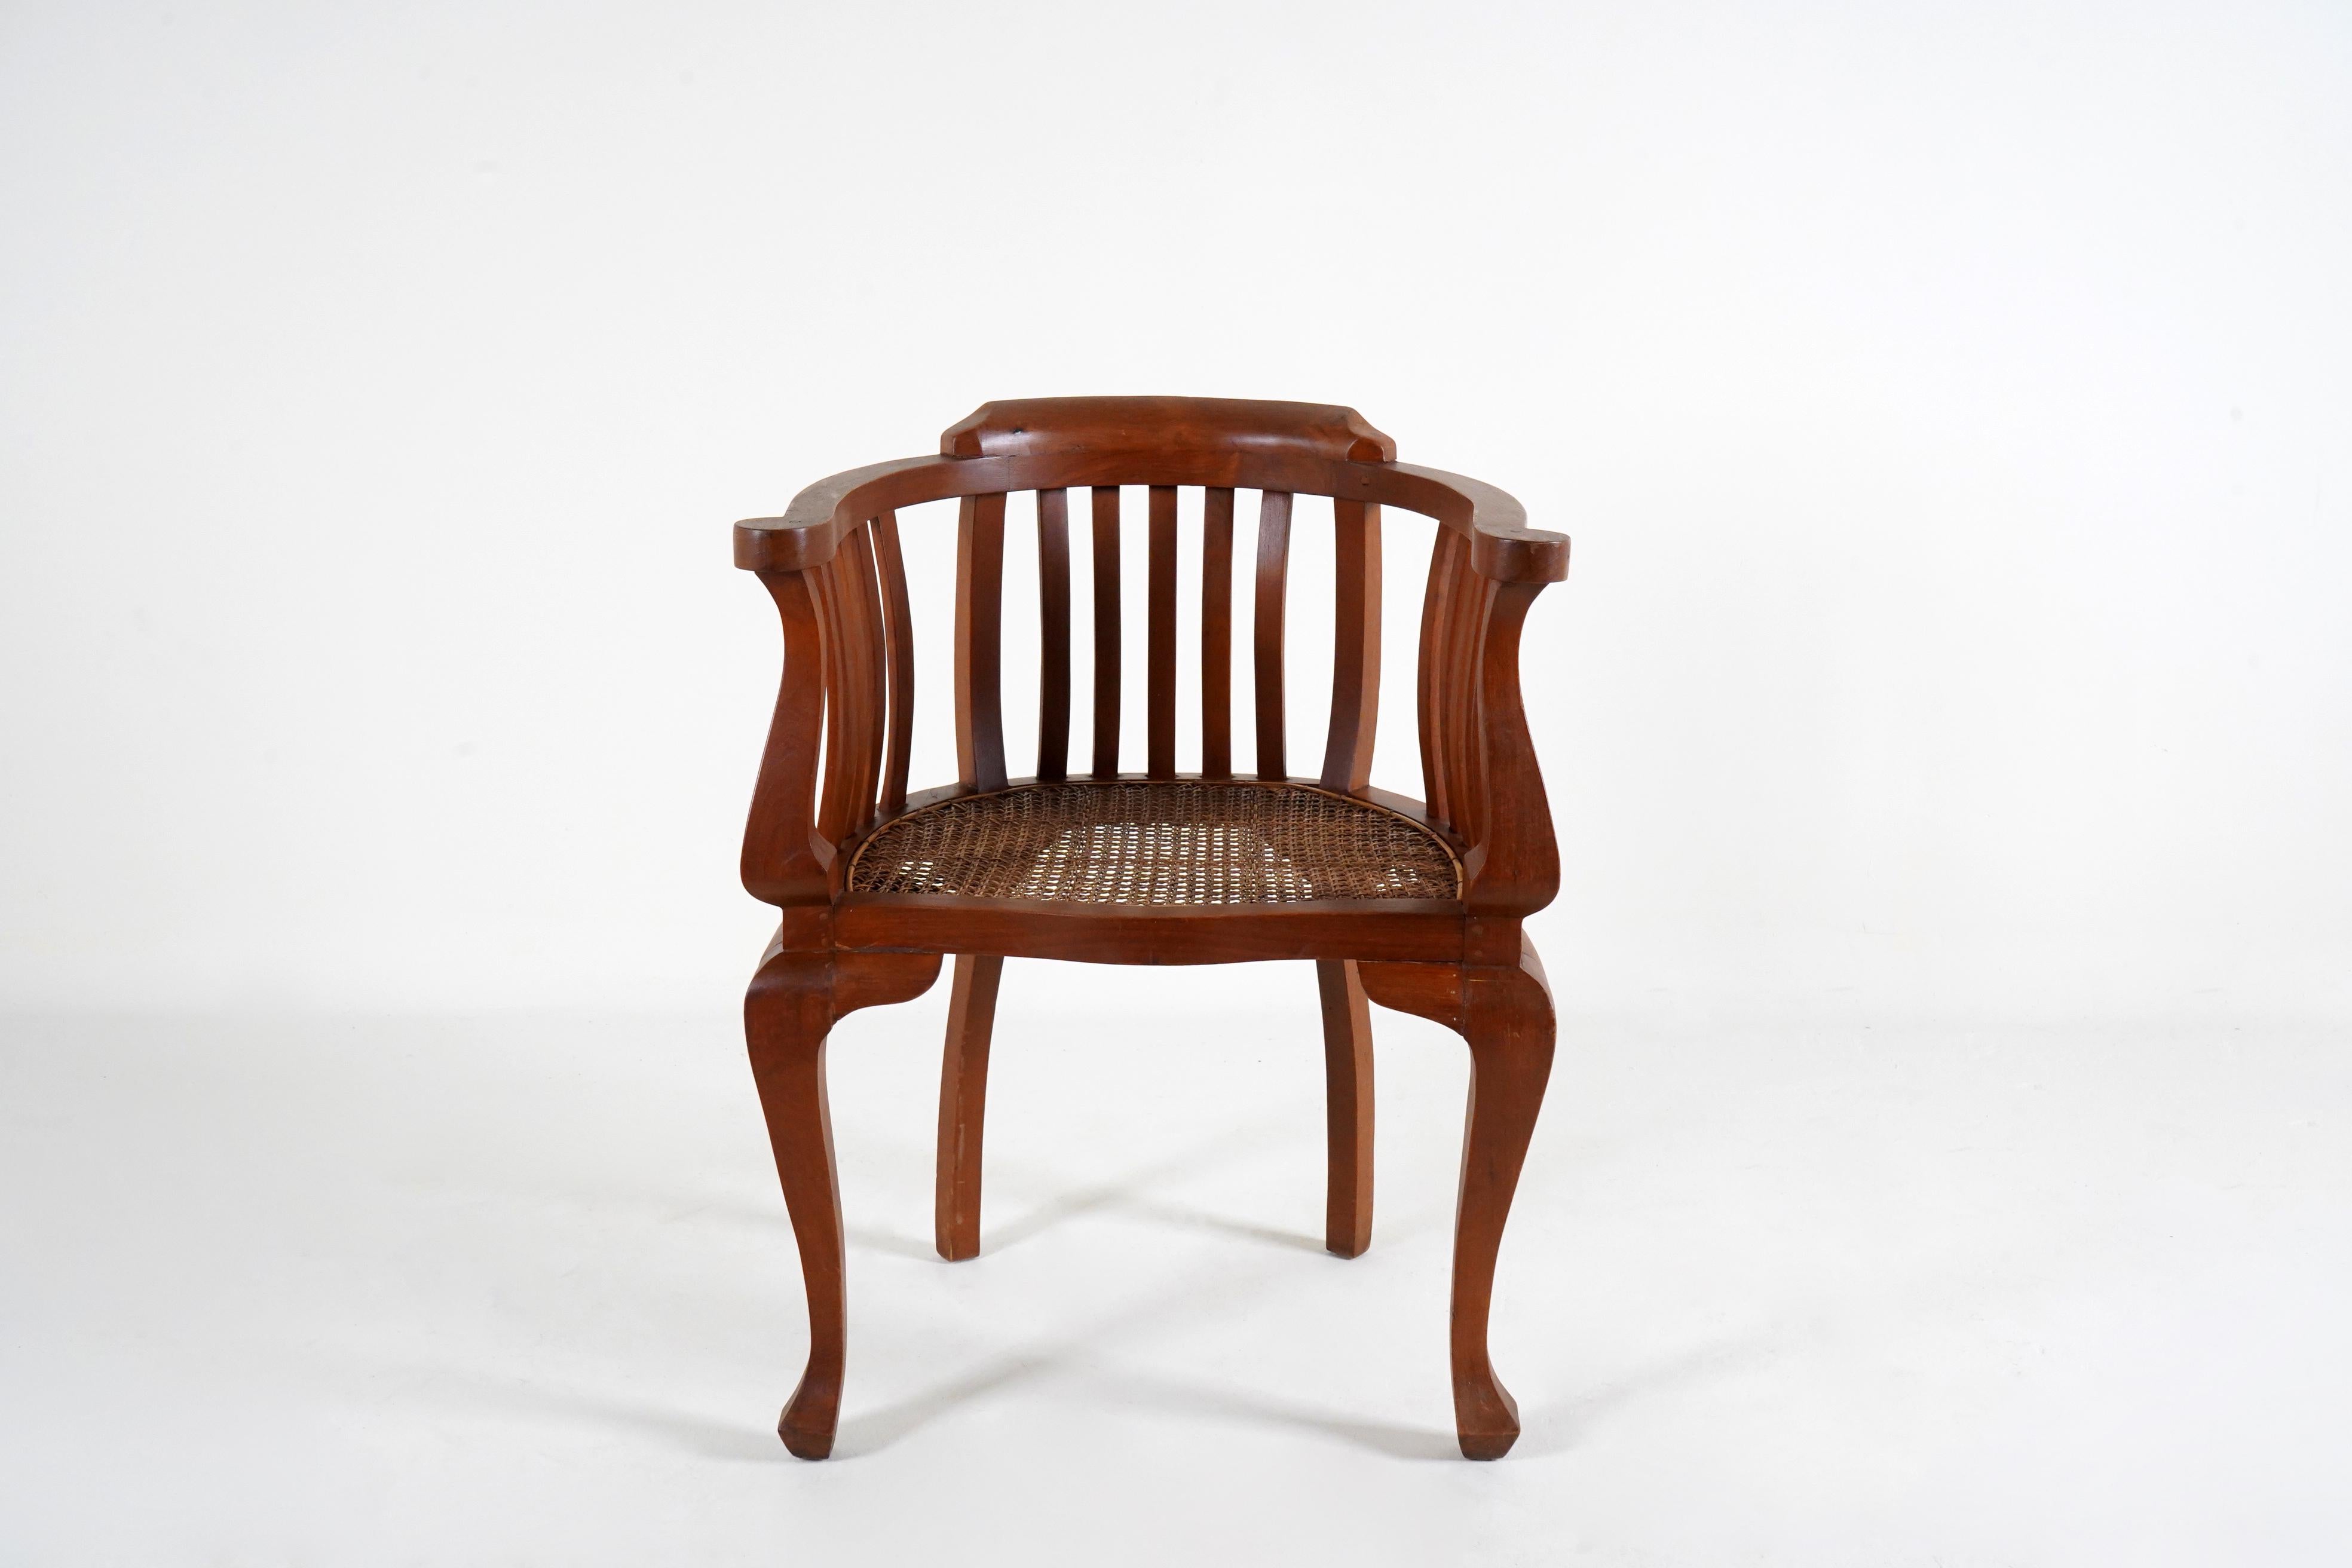 20th Century A Pair of British Colonial Teak Arm Chairs With Rattan Seats